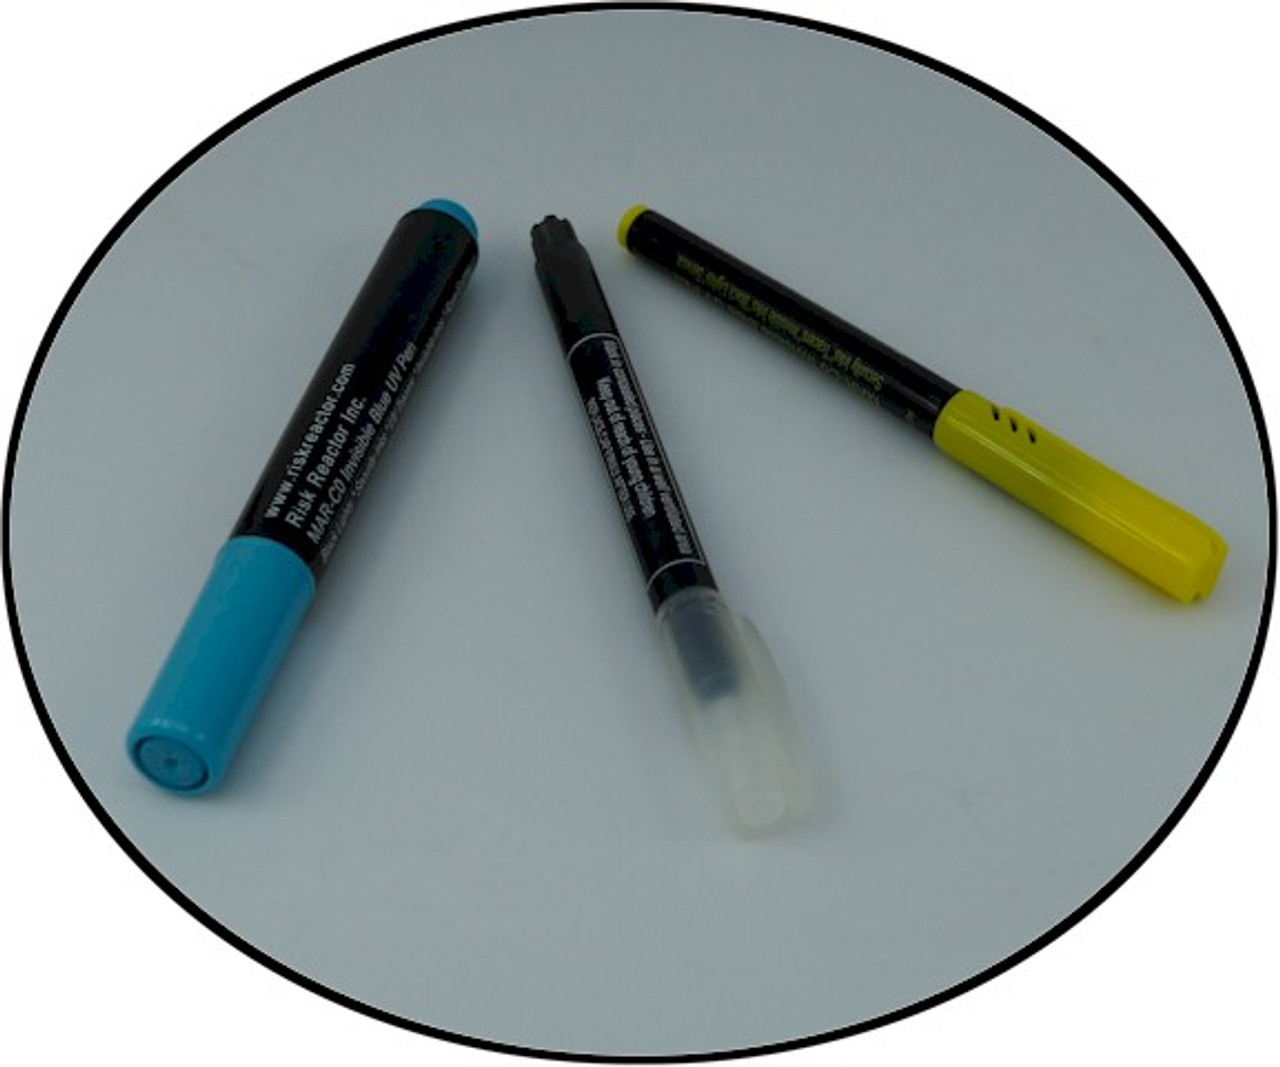 https://cdn11.bigcommerce.com/s-nl905bb/images/stencil/1280x1280/products/3356/3655/Multi_mar_max_dual_pens_invisible_uv_marking_devices__52362.1514344422.jpg?c=2?imbypass=on